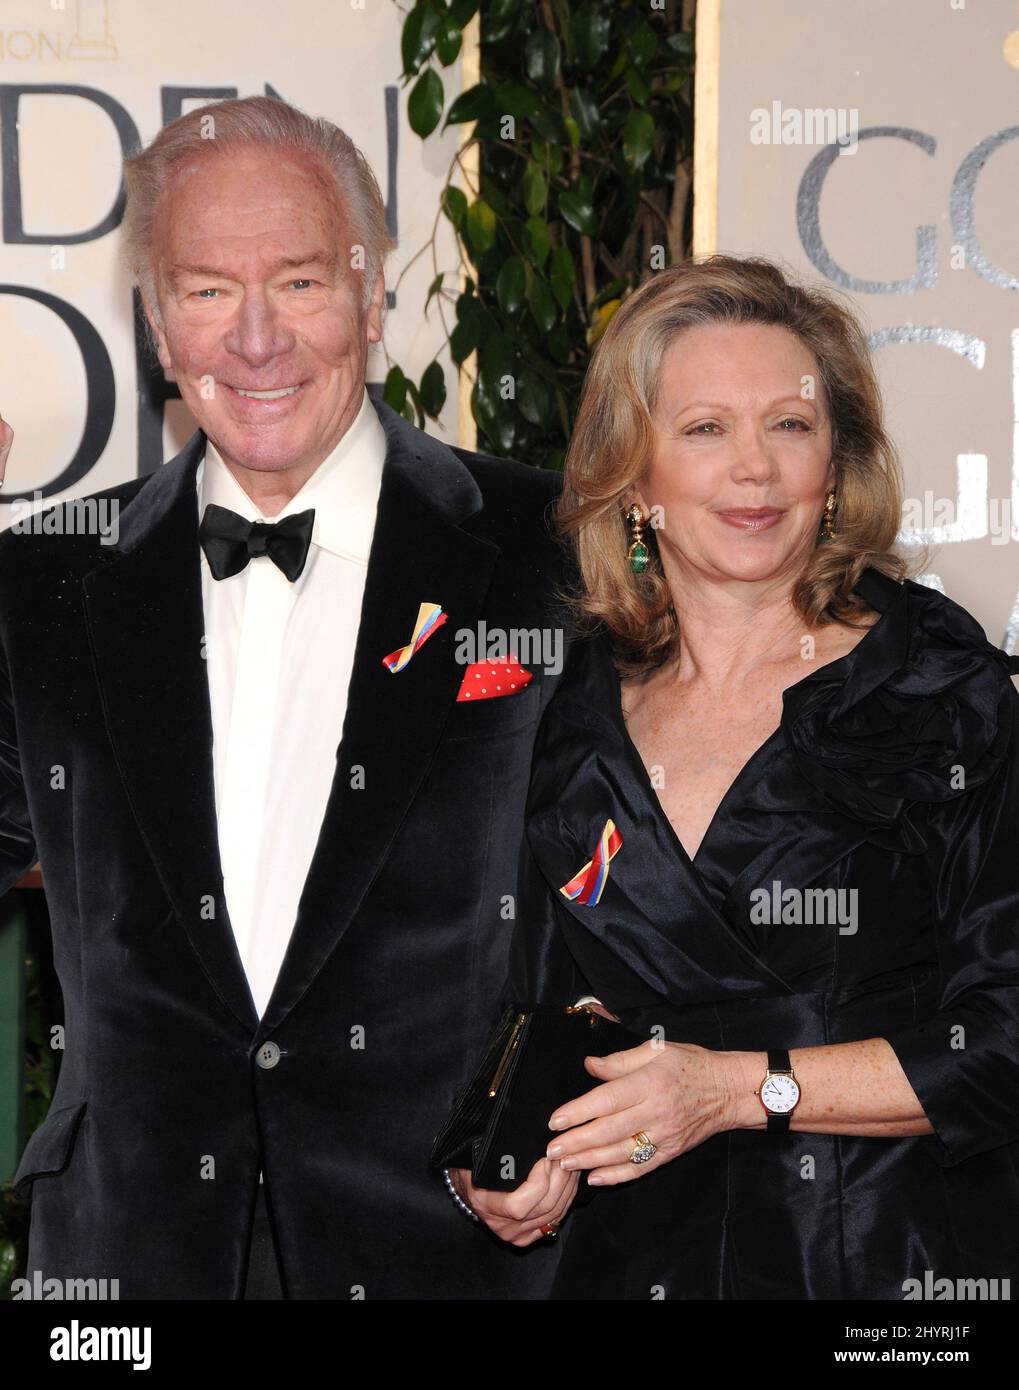 FILE PHOTO: Christopher Plummer, the Canadian-born actor who starred in The Sound of Music died on Friday morning at his home in Connecticut. He was 91. January 17, 2010 Beverly Hills, Ca. Christopher Plummer and wife Elaine Taylor The 67th Annual Golden Globe Awards Held at the Beverly Hilton Hotel Stock Photo